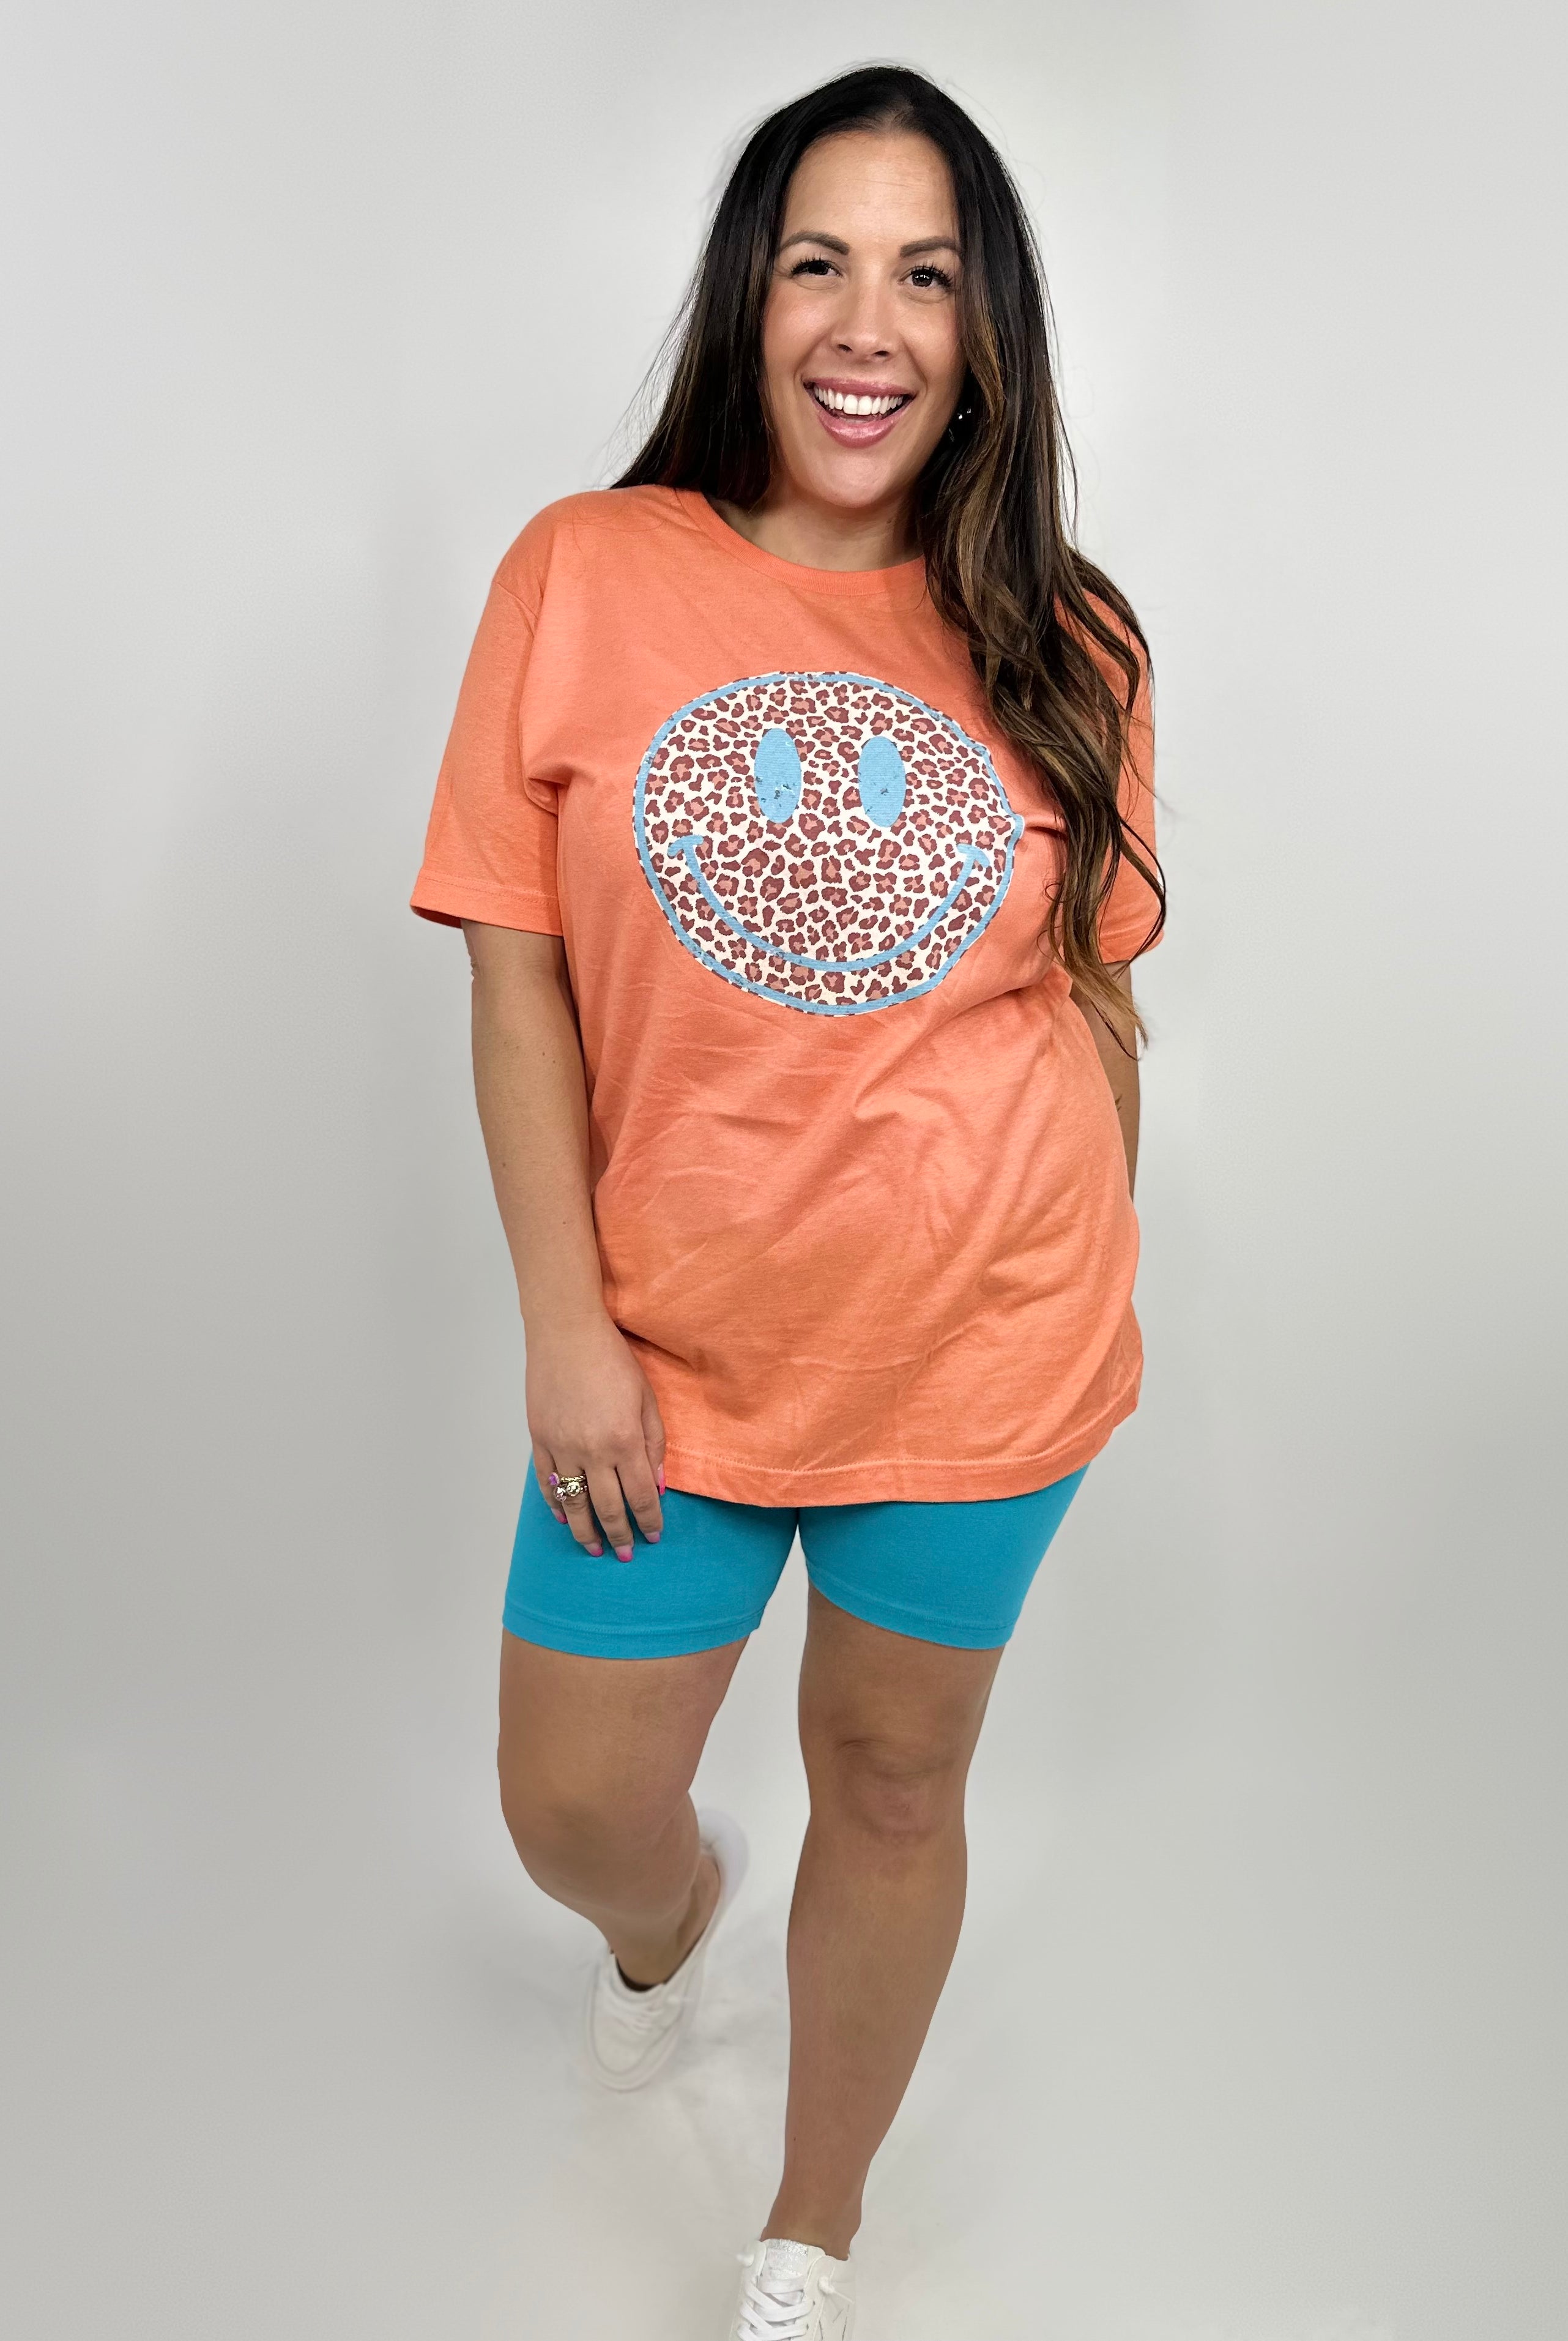 Leopard Smiley Graphic Tee-130 Graphic Tees-Heathered Boho-Heathered Boho Boutique, Women's Fashion and Accessories in Palmetto, FL